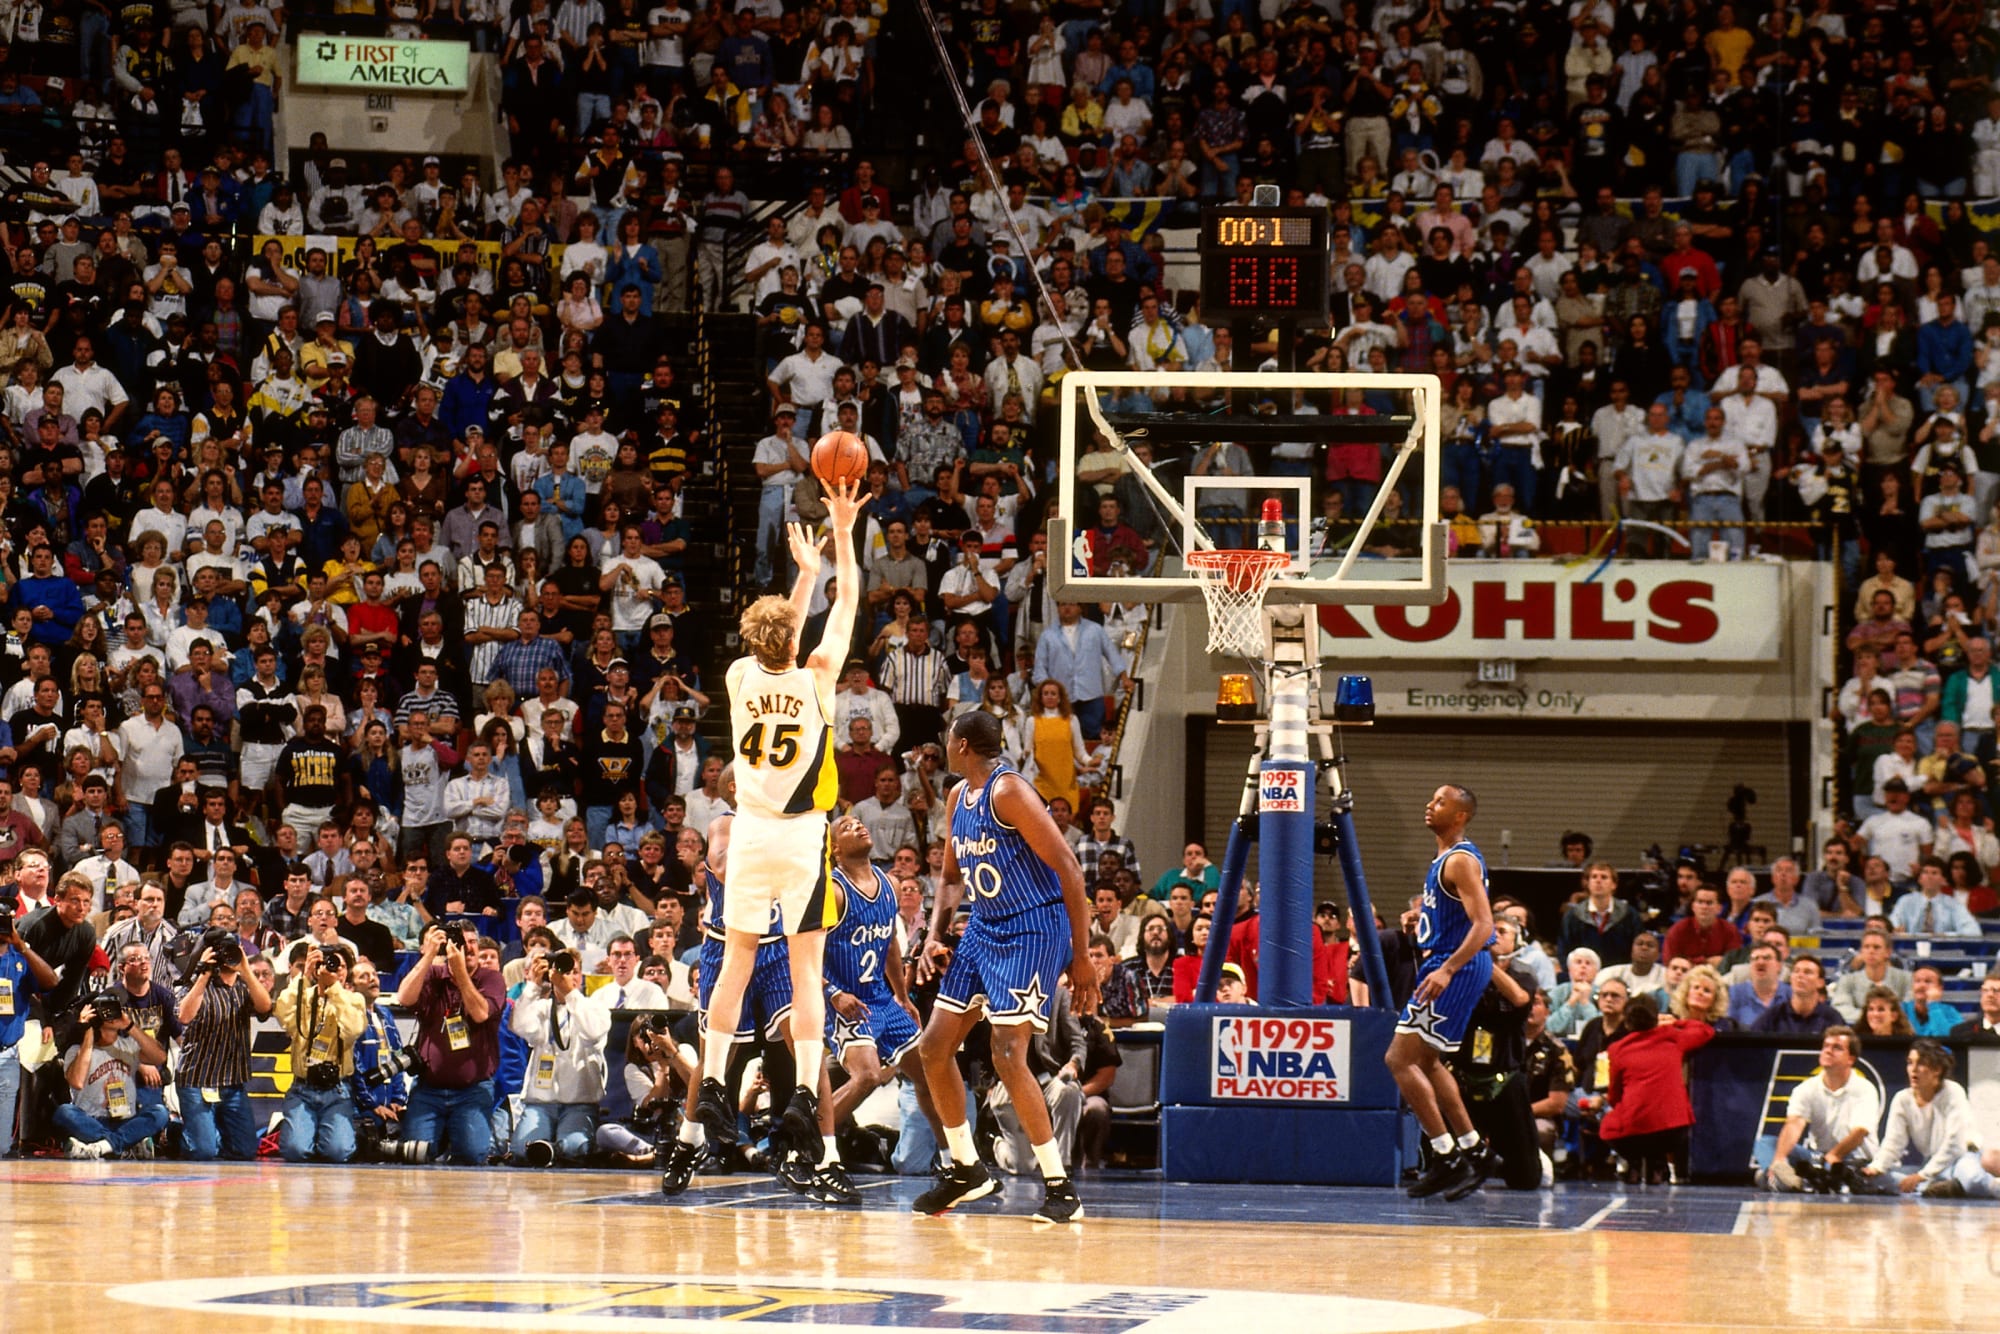 The epic night Rik Smits saved the Indiana Pacers